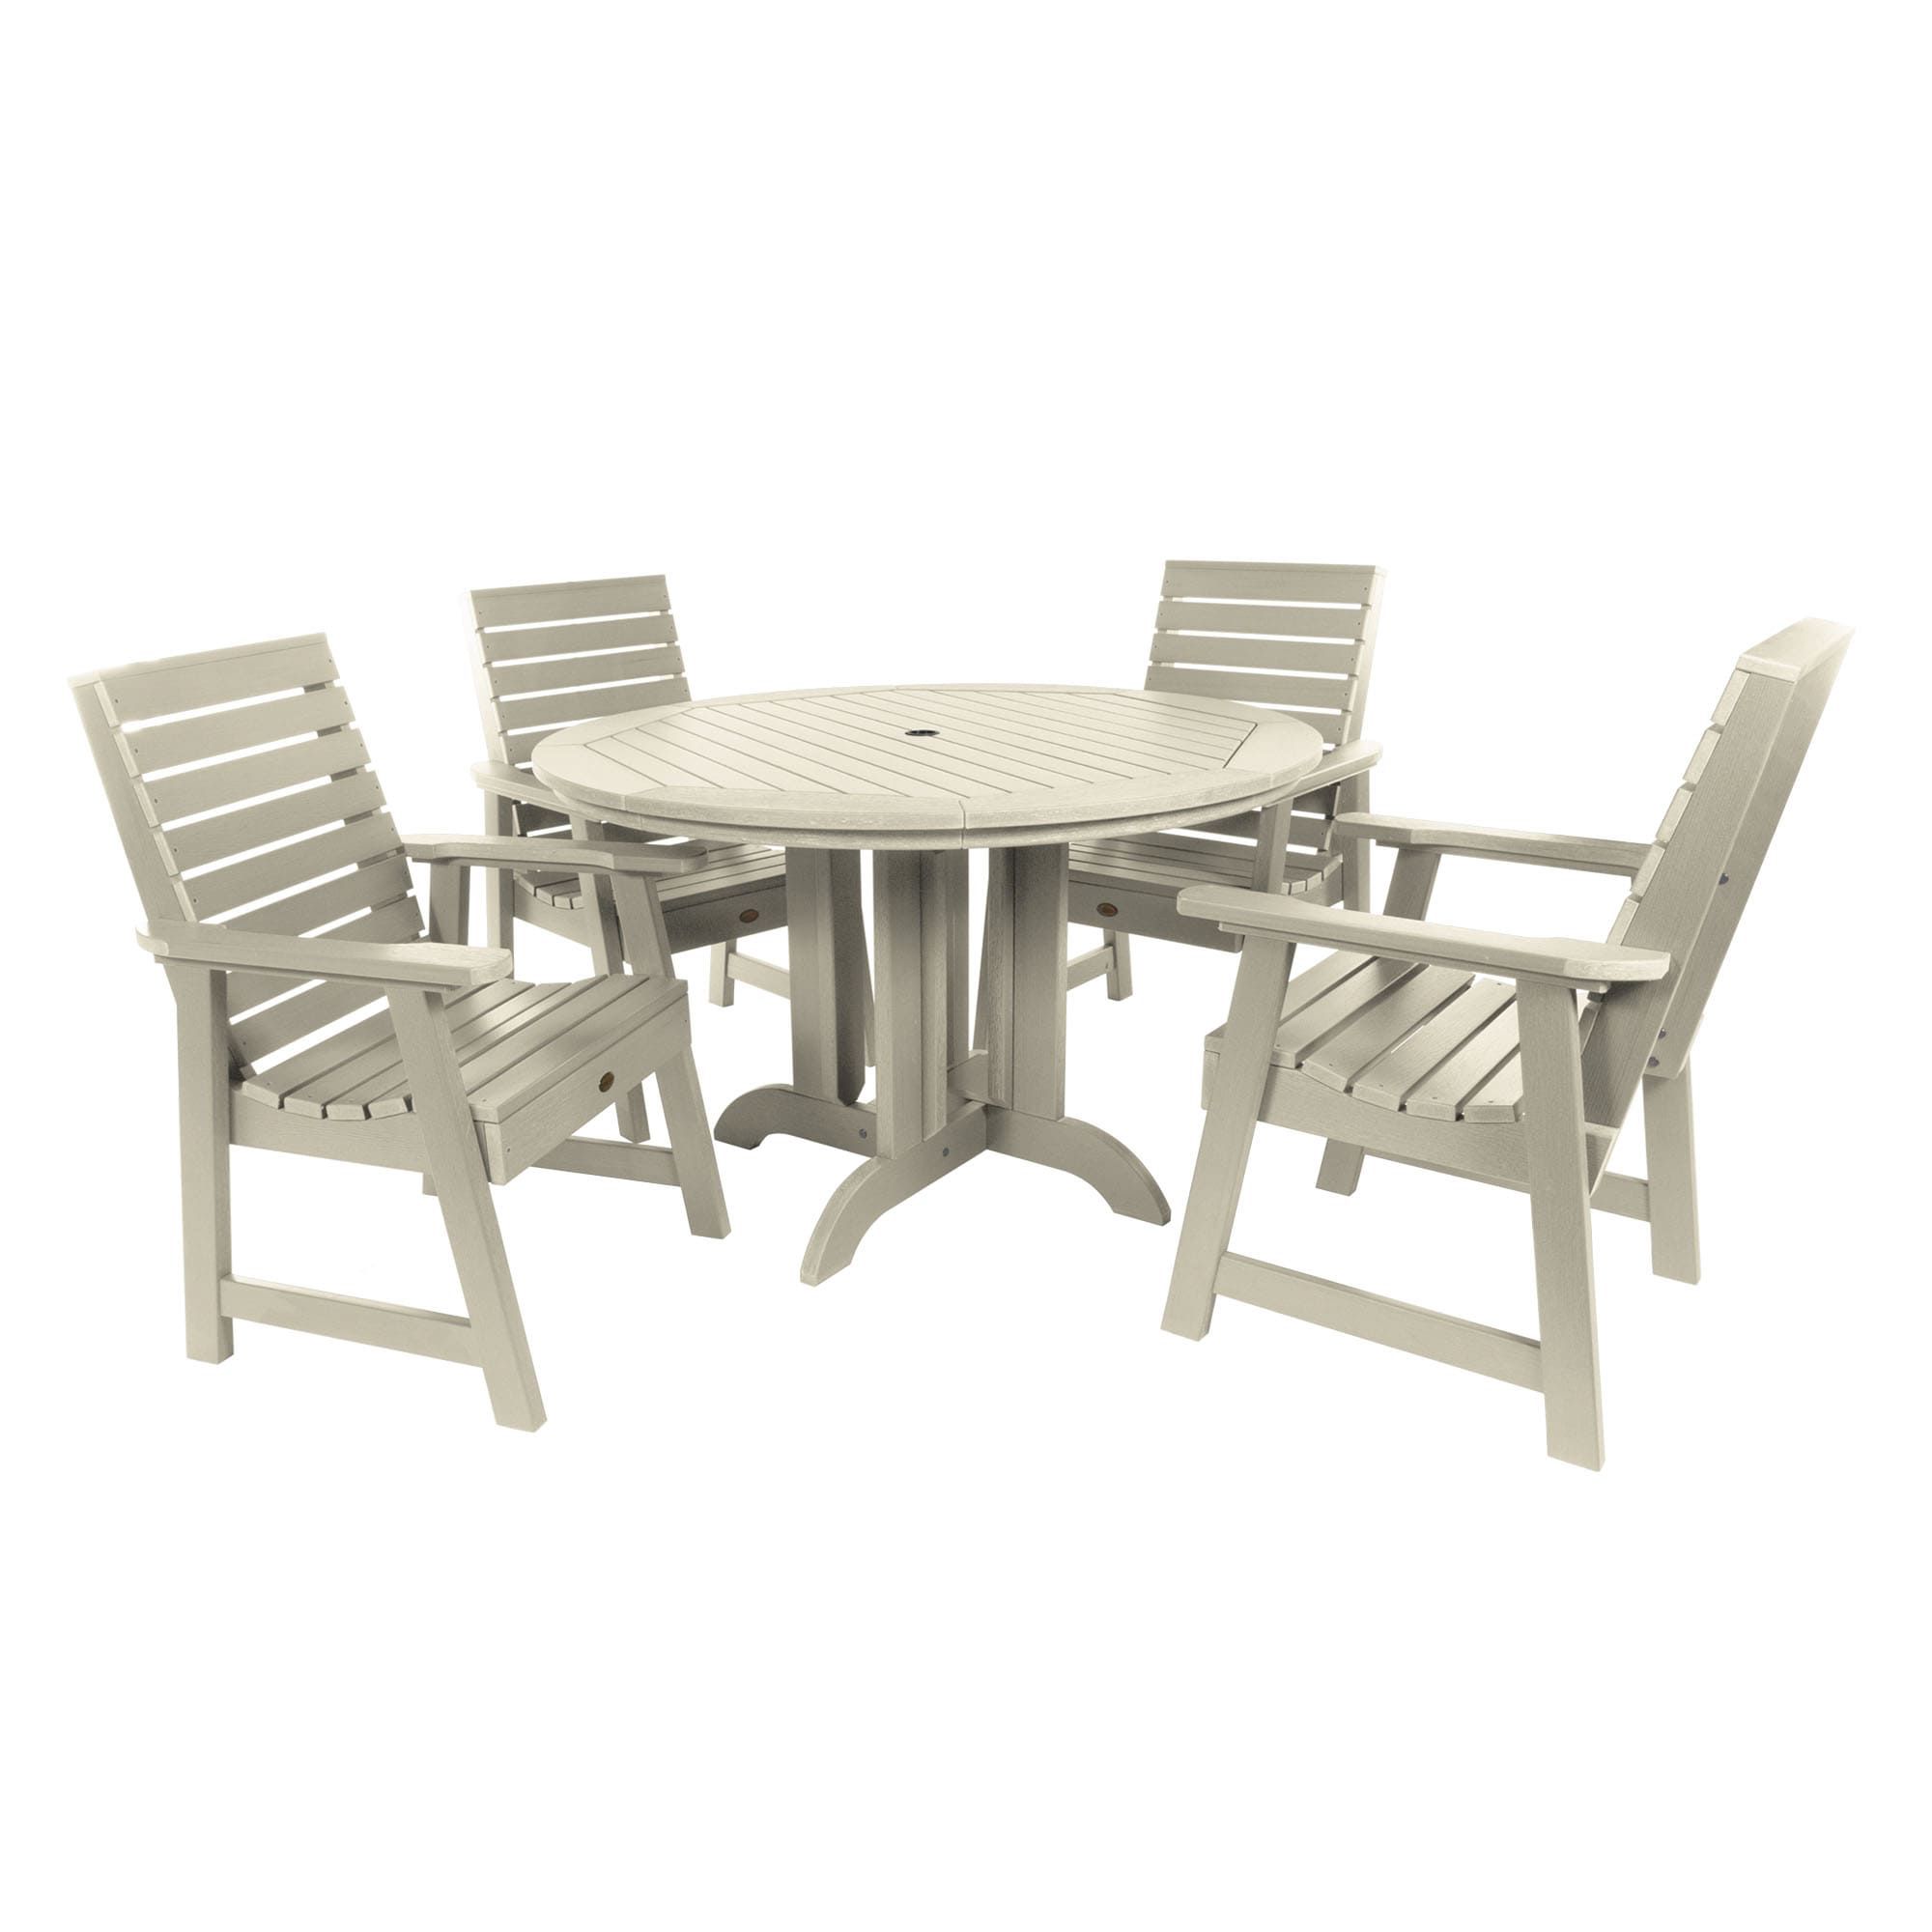 Highwood The Weatherly 5 Piece Off White Patio Dining Set In The Patio  Dining Sets Department At Lowes With Regard To Well Liked Off White Wood Outdoor Tables (View 12 of 15)